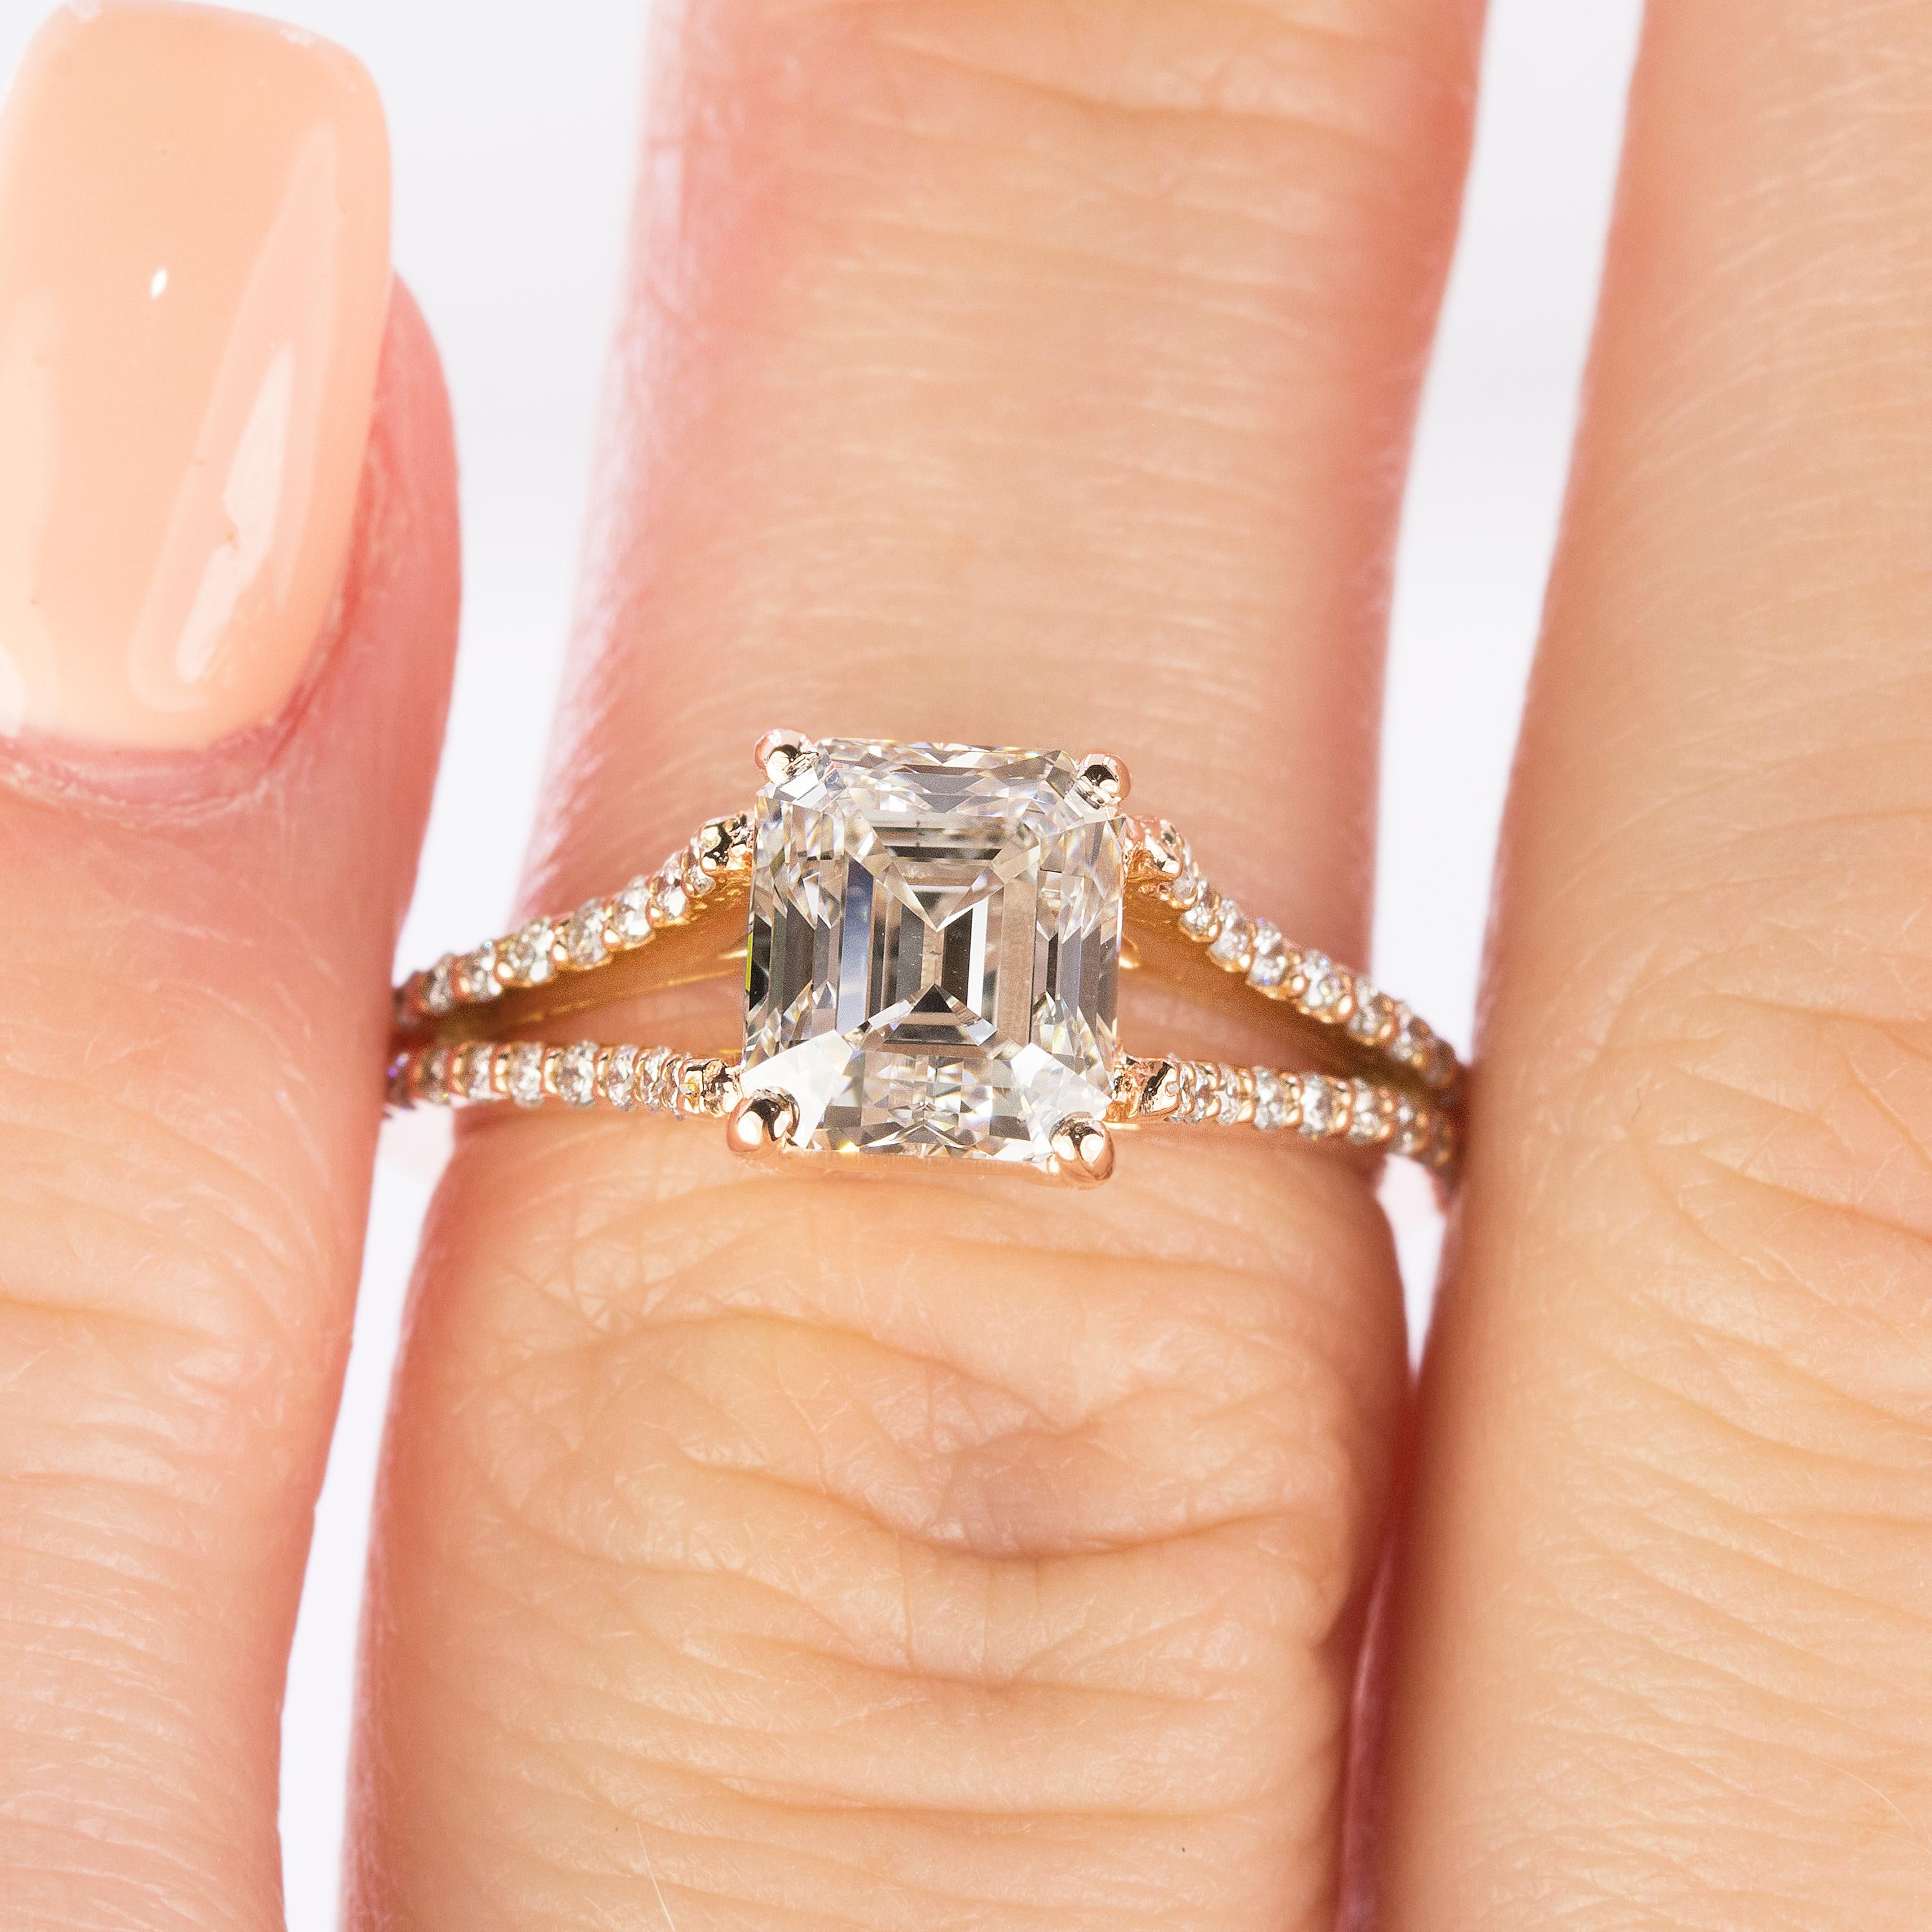 18k Rose Gold ring with one 2.02 carat GIA certified K color VS2 clarity emerald cut diamond and 40 round brilliant diamonds weighing 0.32 carats.